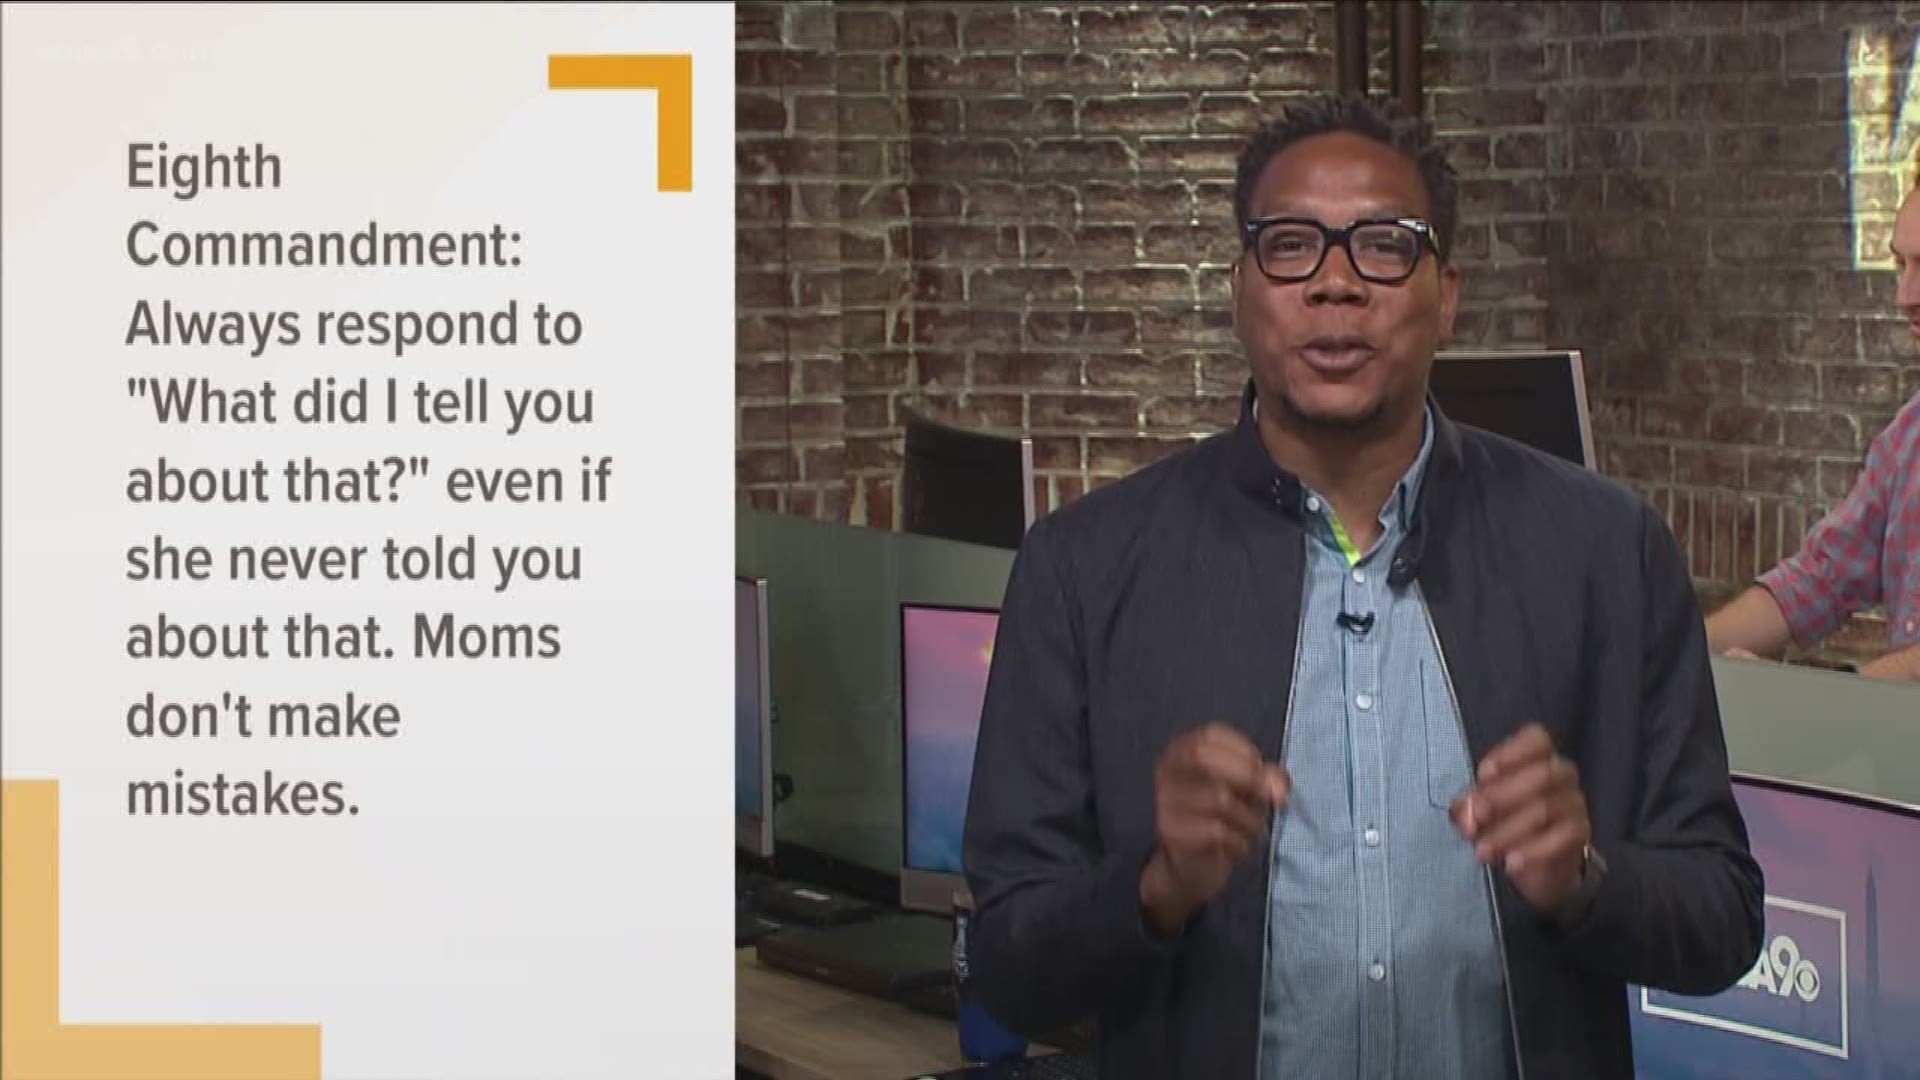 It's Mother's Day weekend and Reese Waters has 10 commandments to make your mother feel special.